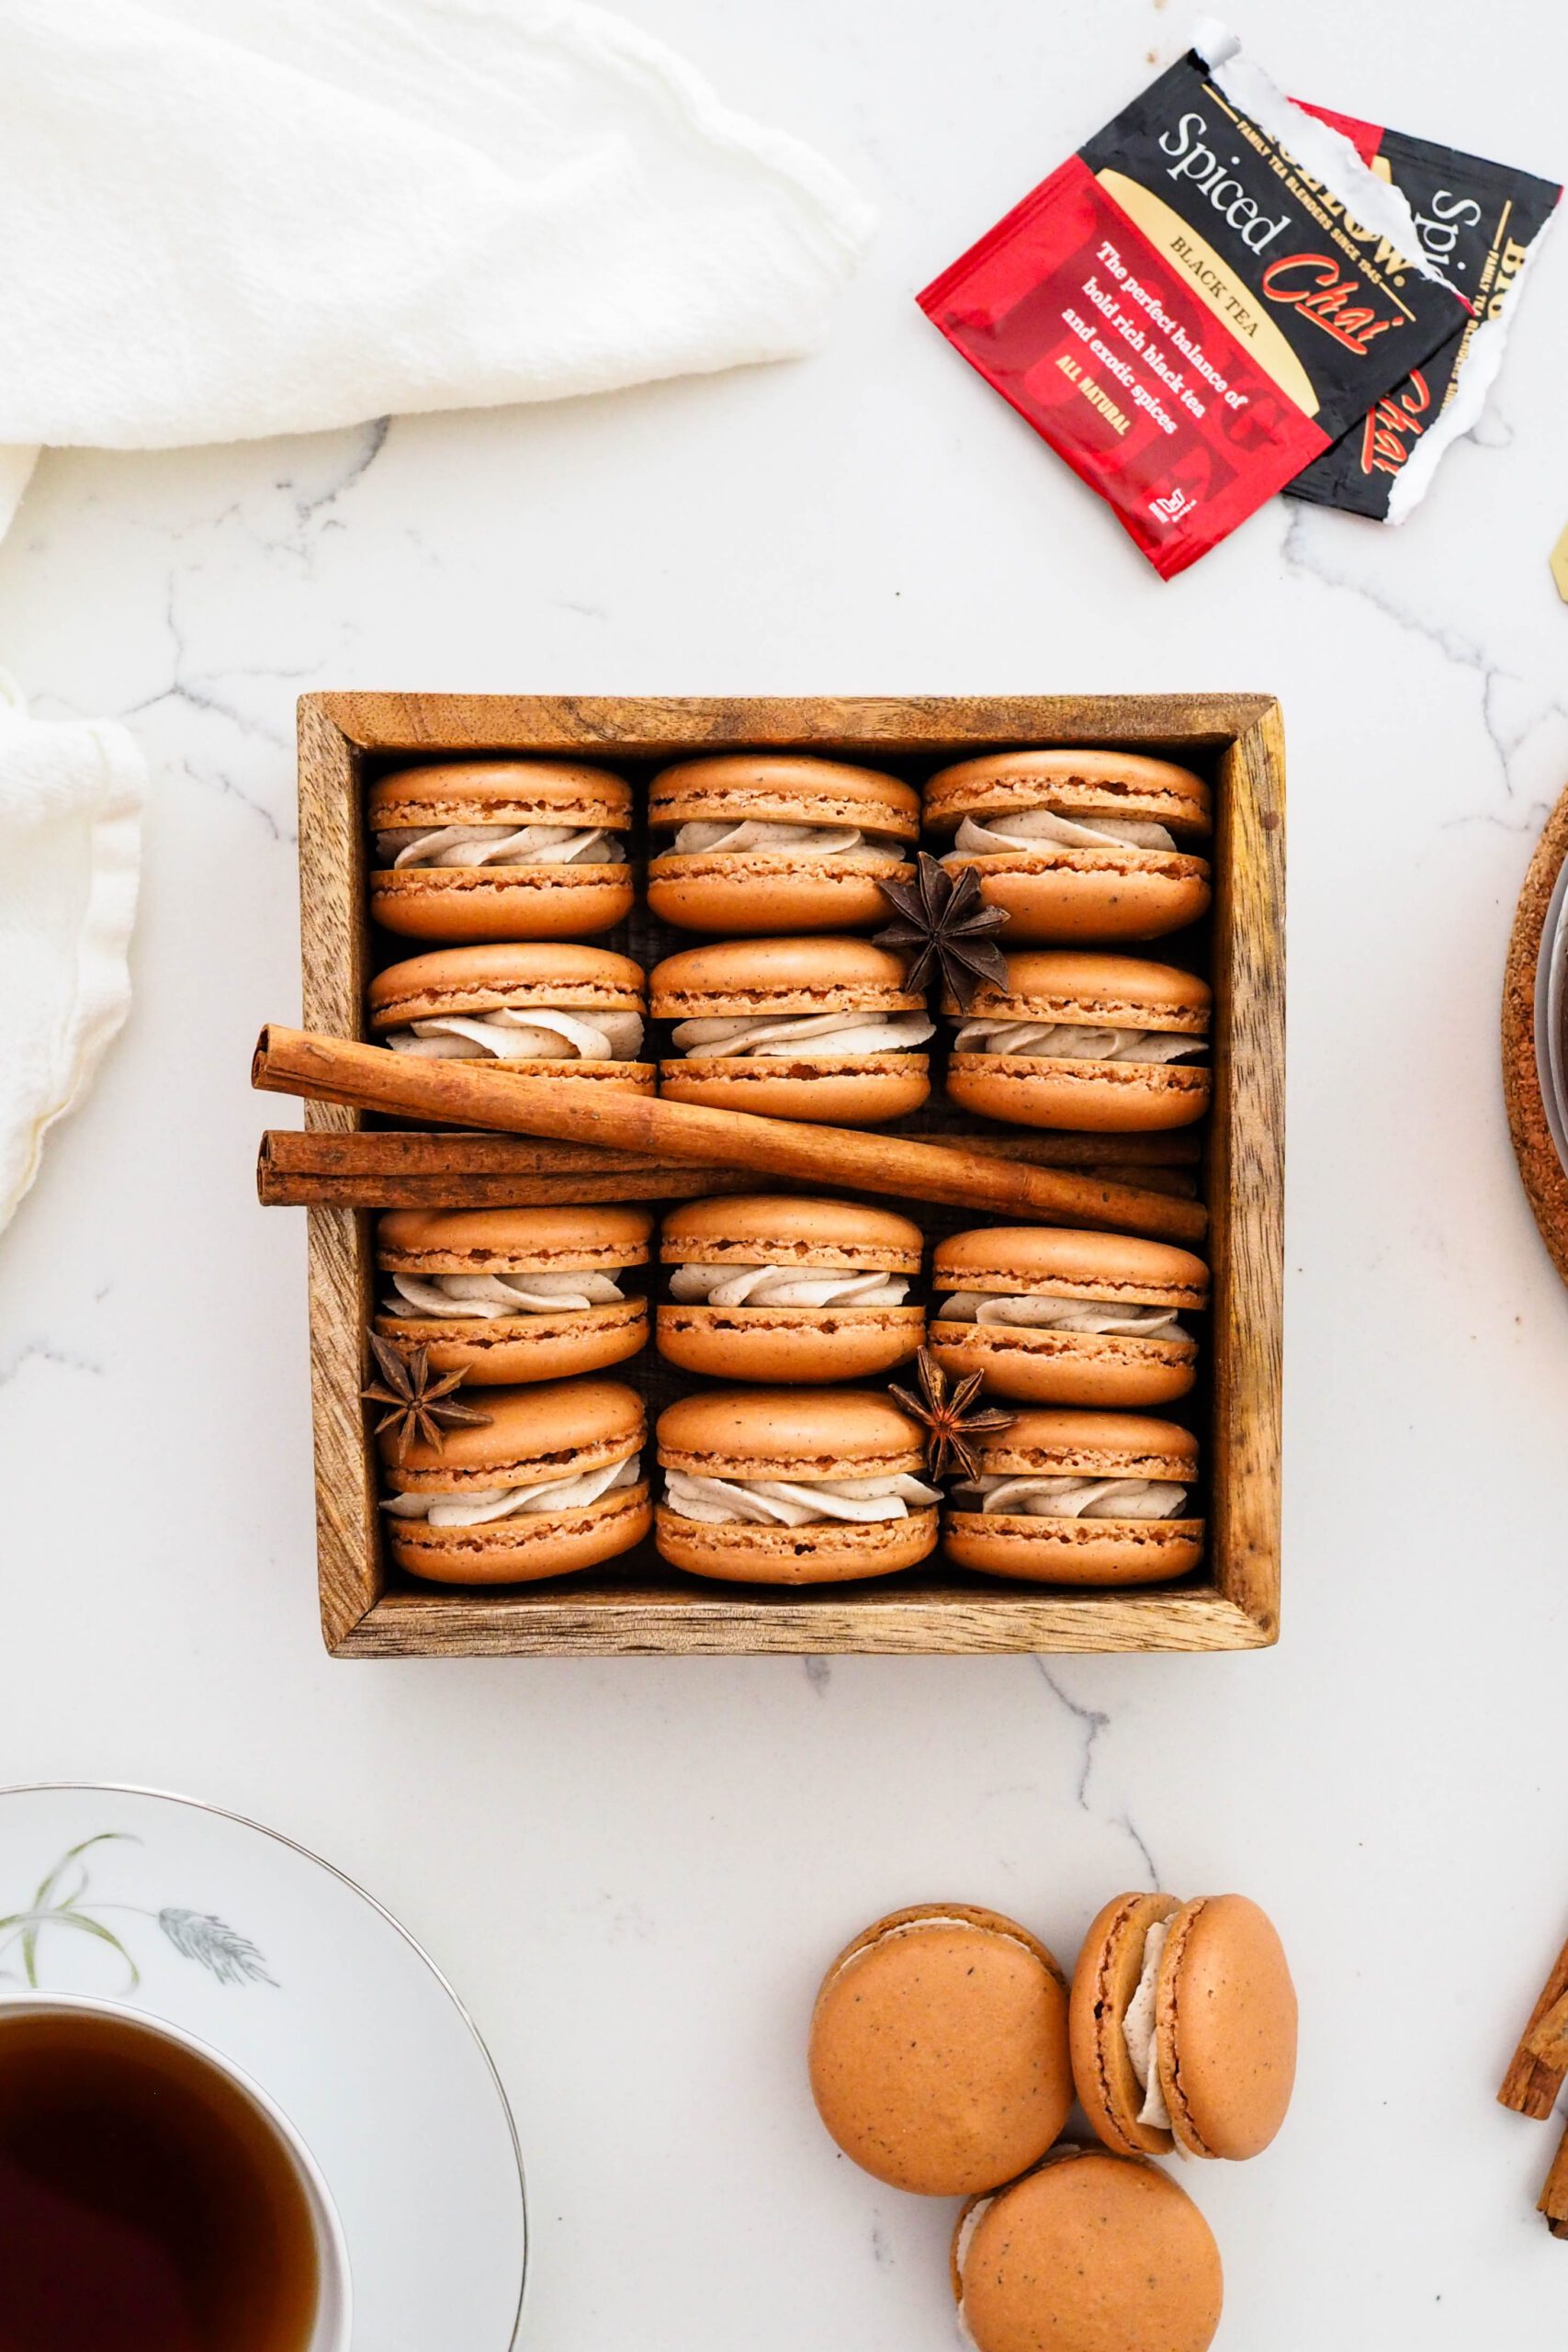 Chai macarons in a wooden box with cinnamon sticks and star anise.